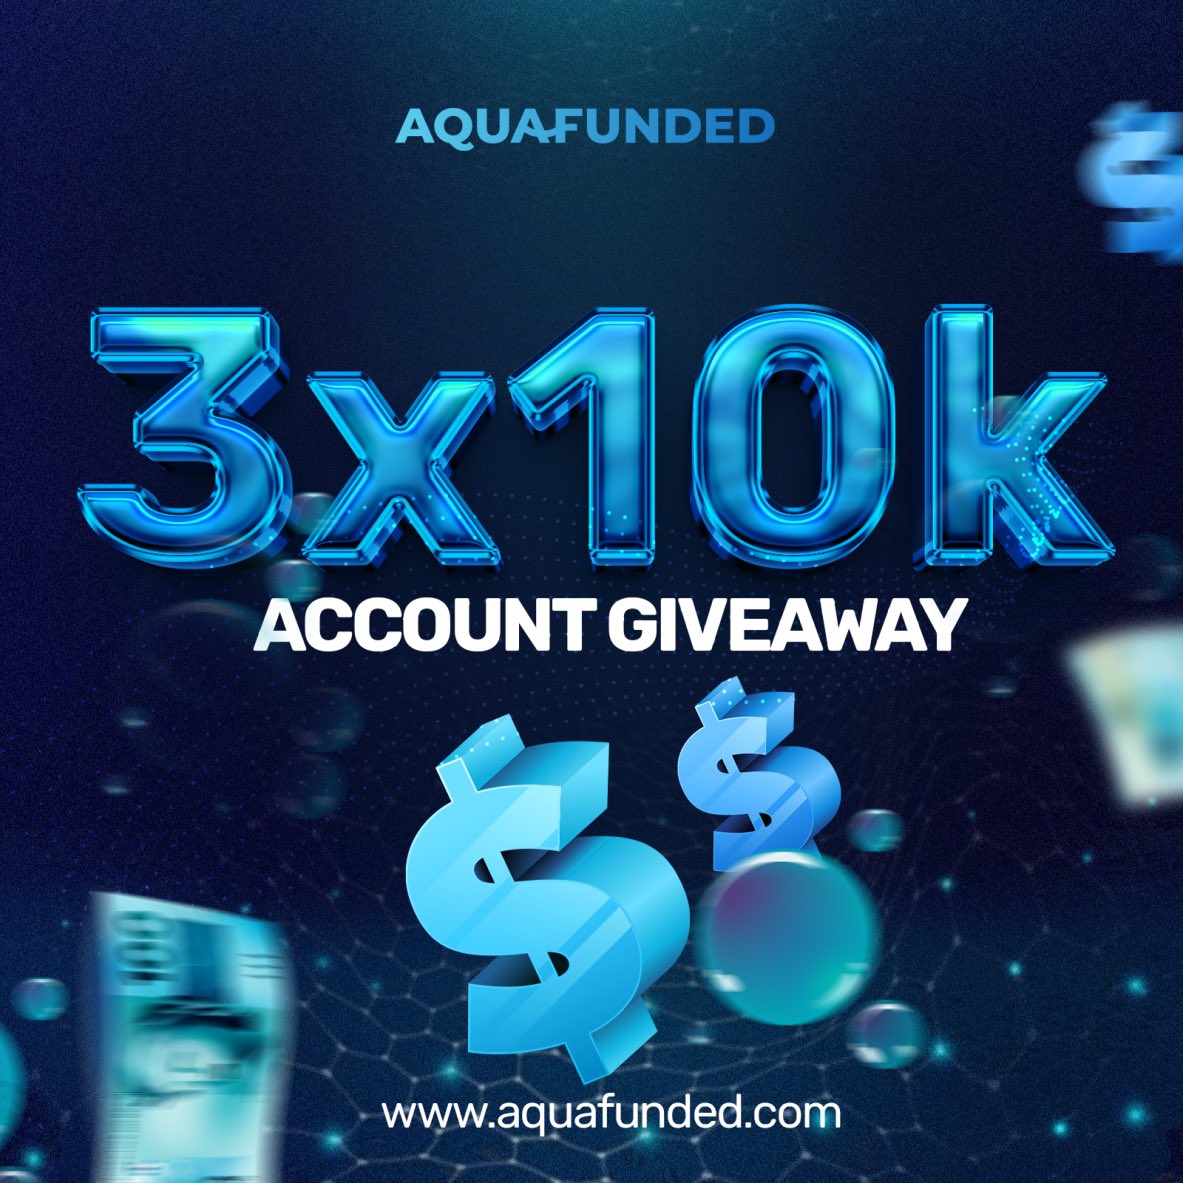 GIVEAWAY ALERT 🚨 3 X $10K Evaluation Accounts GIVEAWAY 🎁 To enter: 1️⃣Must Follow @AquaFunded @Realhas_ @taptapFX2 @TraderKaizen0 2️⃣ Like & RT this post 3️⃣ Tag 4 friends Winners in 72 Hours🫂💜